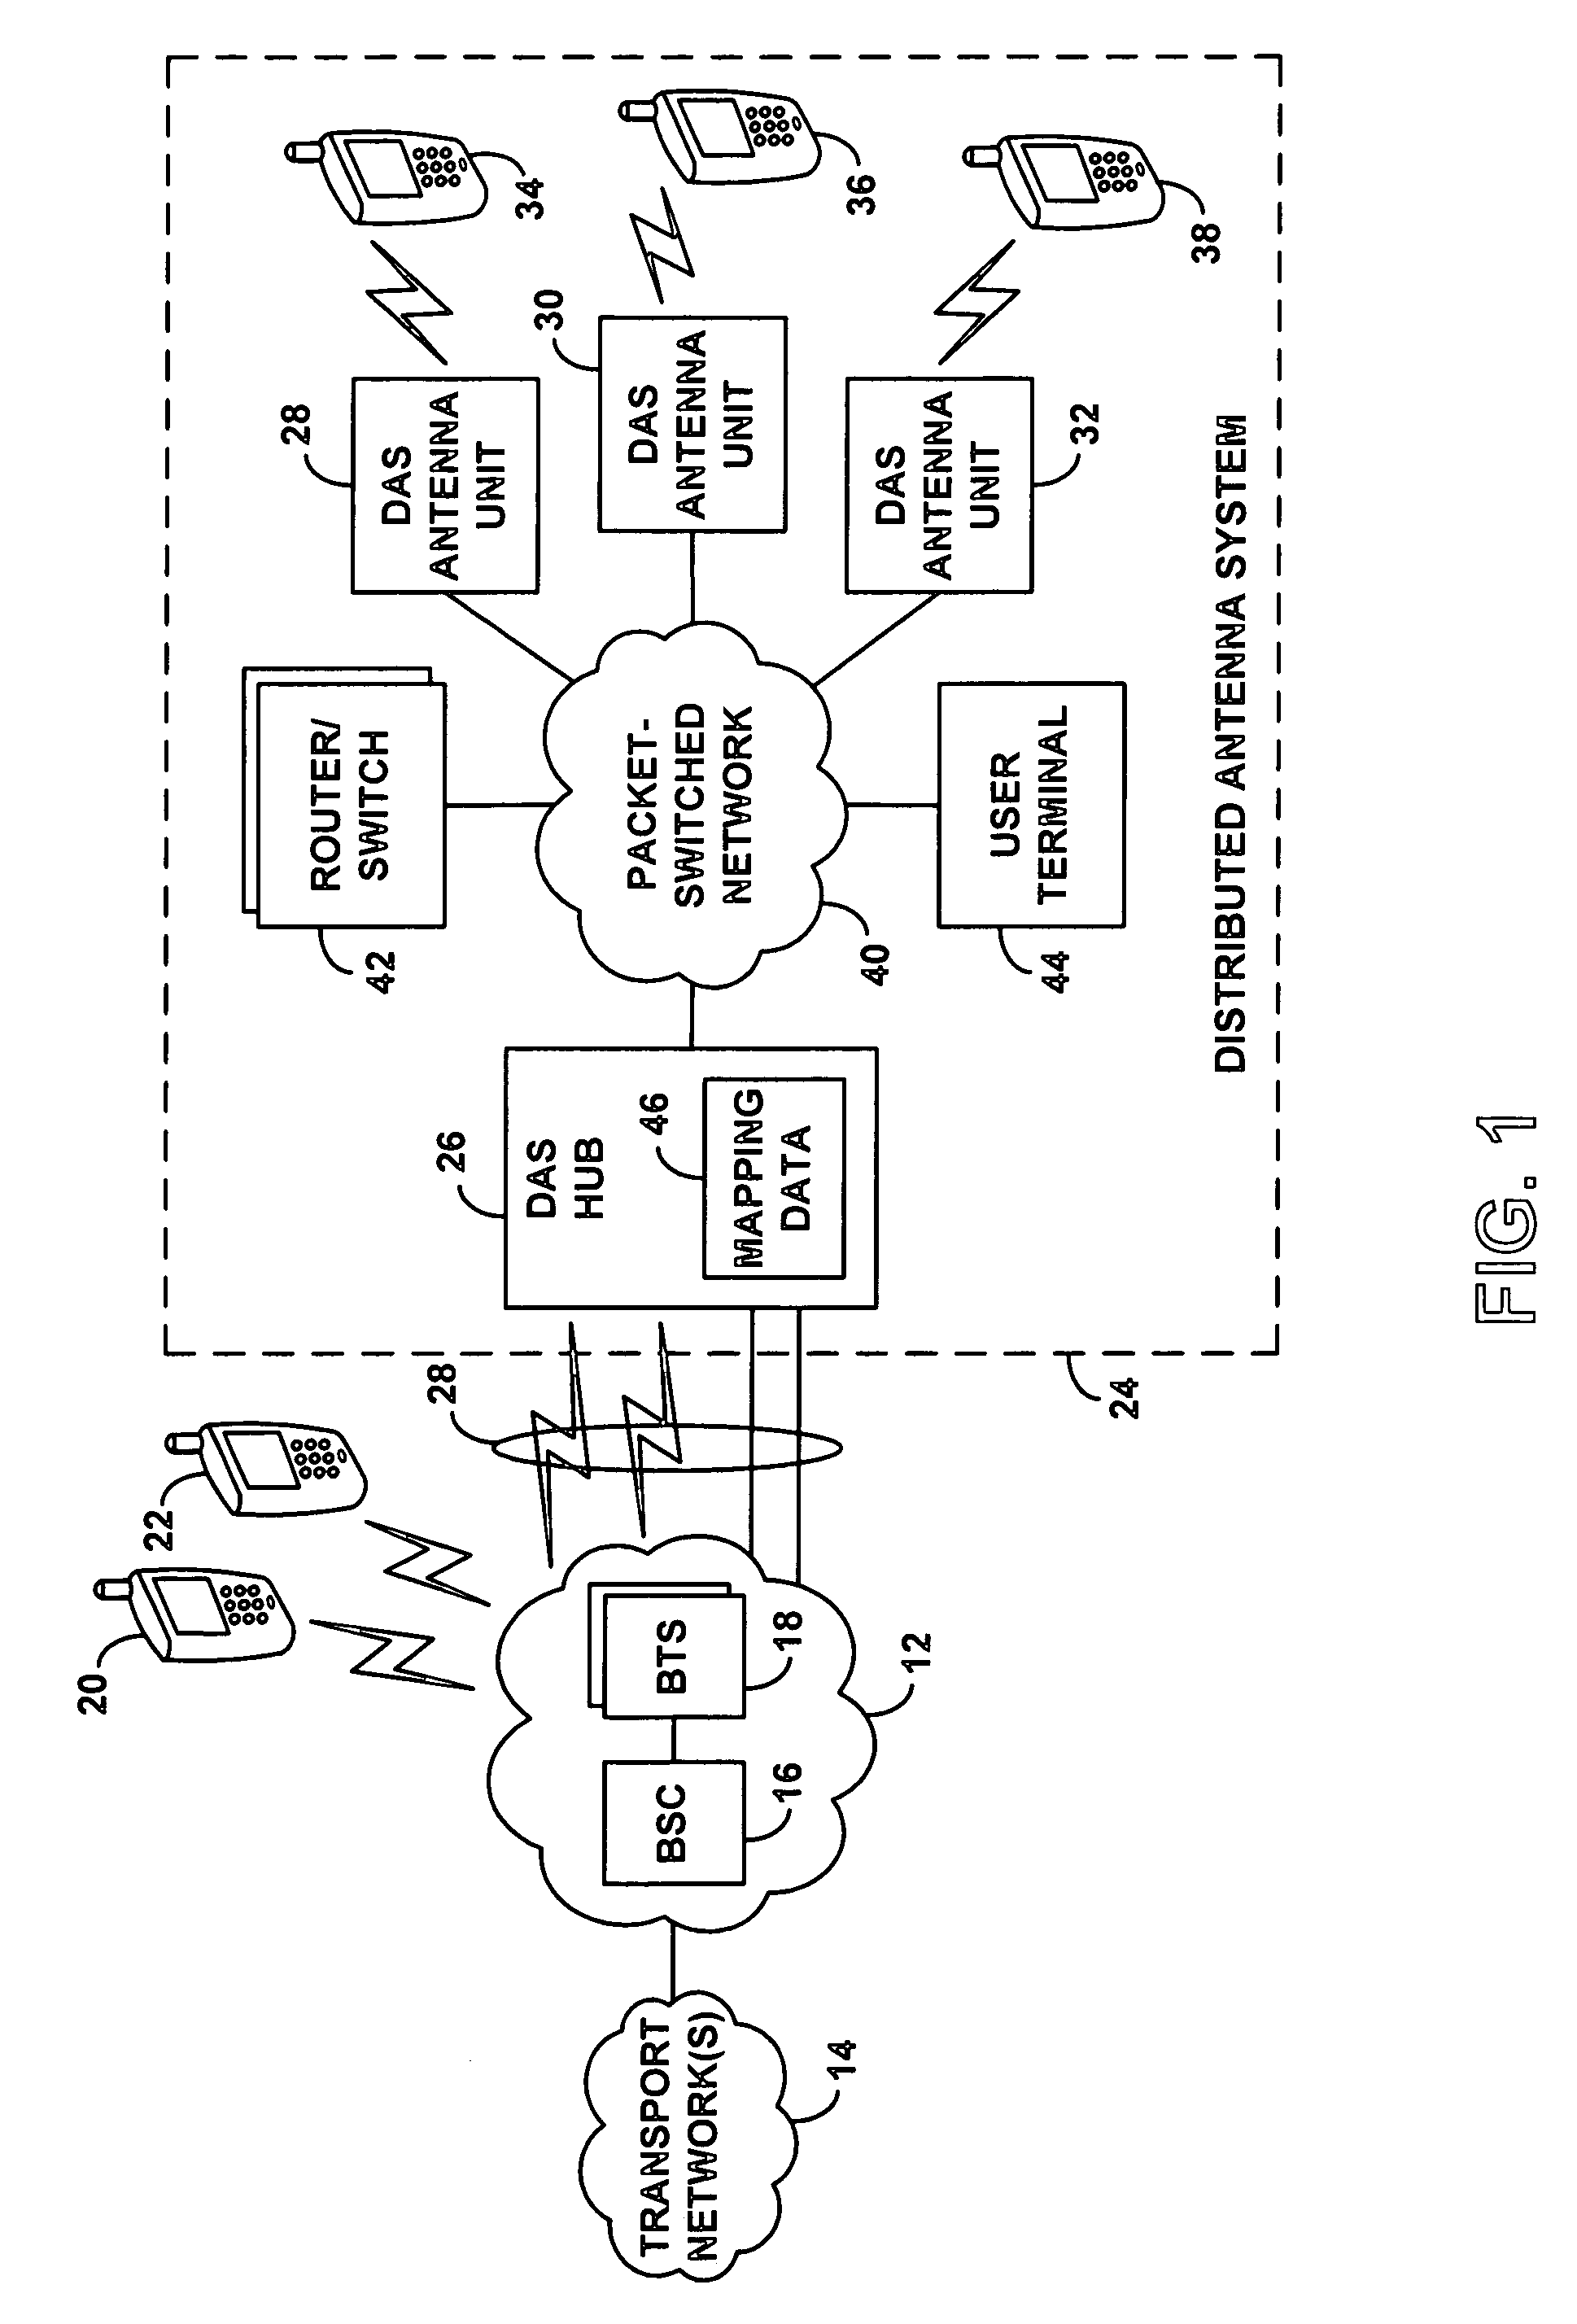 Method and system for dynamically routing between a radio access network and distributed antenna system remote antenna units